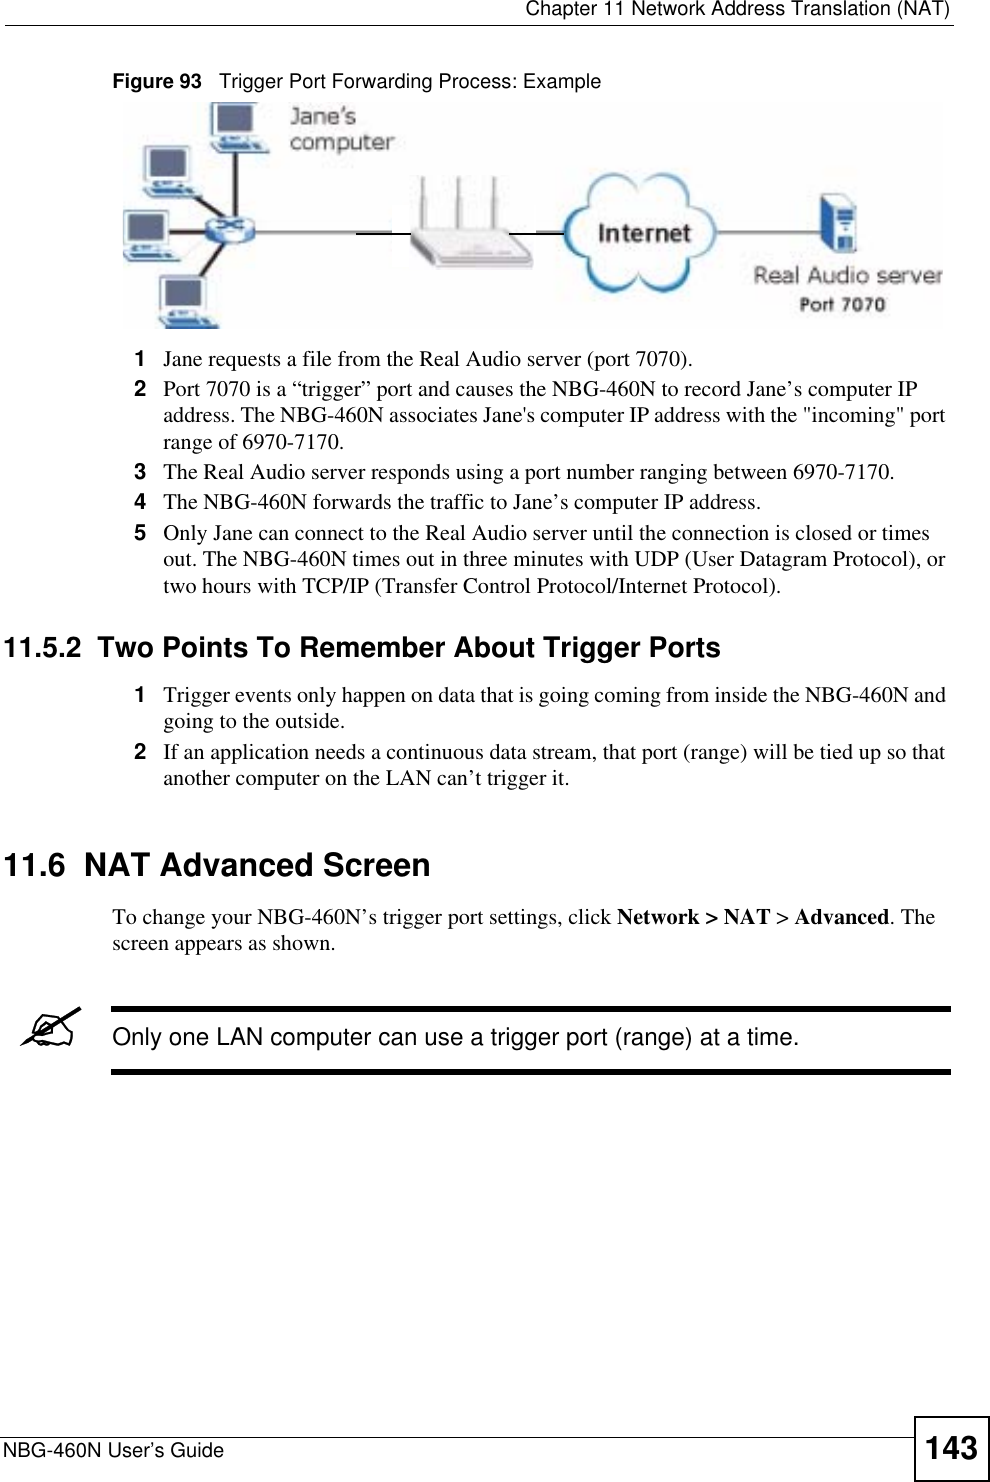  Chapter 11 Network Address Translation (NAT)NBG-460N User’s Guide 143Figure 93   Trigger Port Forwarding Process: Example1Jane requests a file from the Real Audio server (port 7070).2Port 7070 is a “trigger” port and causes the NBG-460N to record Jane’s computer IP address. The NBG-460N associates Jane&apos;s computer IP address with the &quot;incoming&quot; port range of 6970-7170.3The Real Audio server responds using a port number ranging between 6970-7170.4The NBG-460N forwards the traffic to Jane’s computer IP address. 5Only Jane can connect to the Real Audio server until the connection is closed or times out. The NBG-460N times out in three minutes with UDP (User Datagram Protocol), or two hours with TCP/IP (Transfer Control Protocol/Internet Protocol). 11.5.2  Two Points To Remember About Trigger Ports1Trigger events only happen on data that is going coming from inside the NBG-460N and going to the outside.2If an application needs a continuous data stream, that port (range) will be tied up so that another computer on the LAN can’t trigger it.11.6  NAT Advanced ScreenTo change your NBG-460N’s trigger port settings, click Network &gt; NAT &gt; Advanced. The screen appears as shown.&quot;Only one LAN computer can use a trigger port (range) at a time.